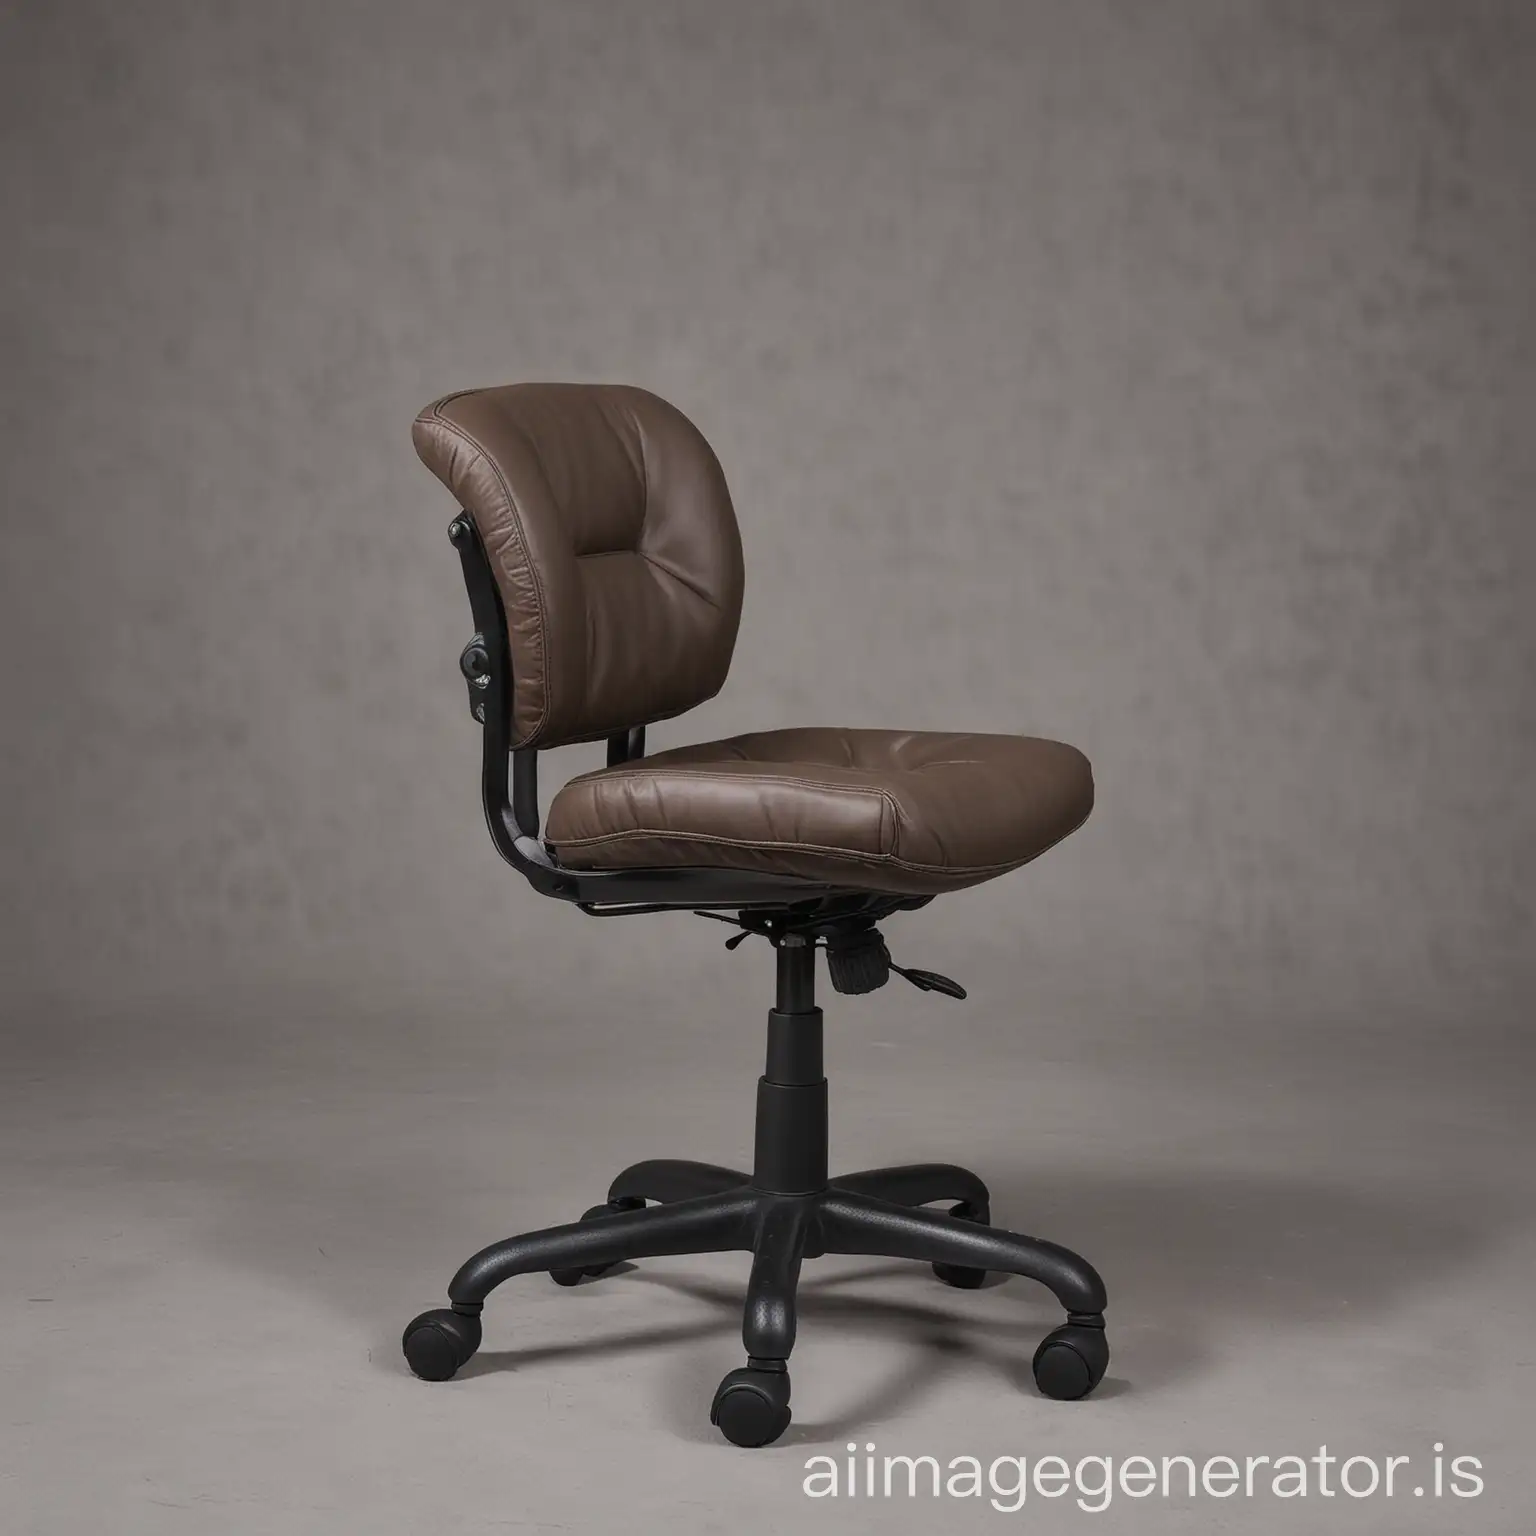 Show images of office chairs with different upholstery materials, such as breathable fabric and leather. Highlight the pros and cons of each material choice.